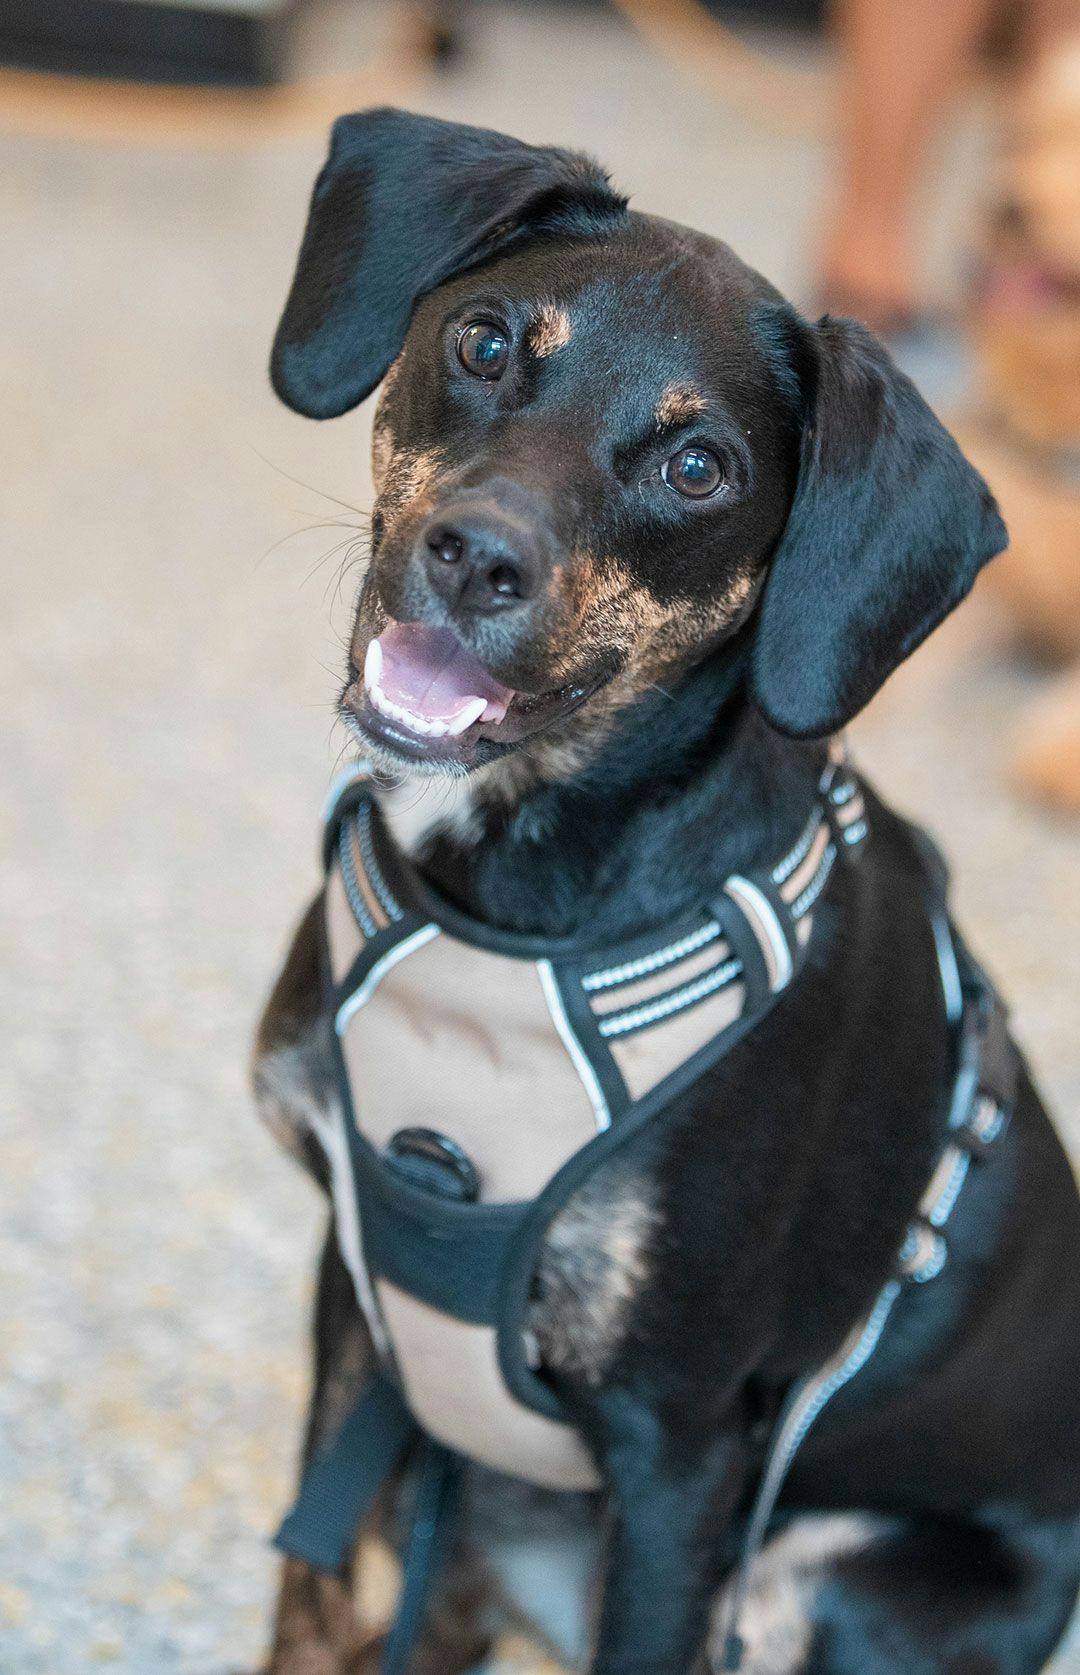 Black dog wearing a harness looking at the camera